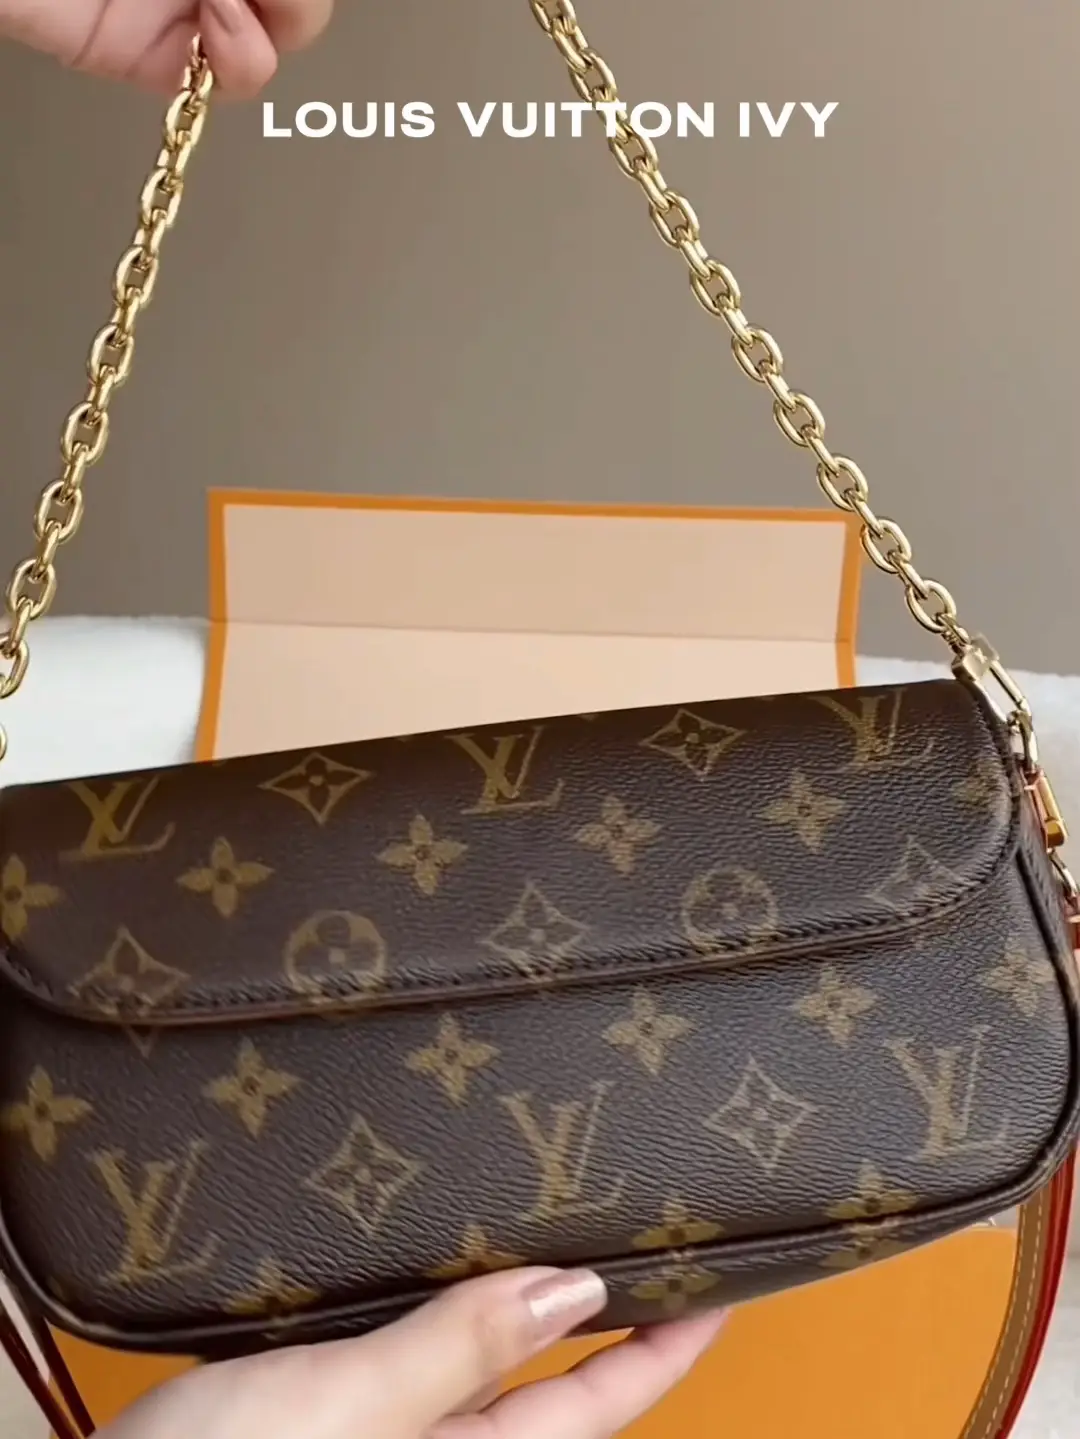 Louis Vuitton Ivy Brand Name Bag So Cute 🤎, Video published by Maprang.ny